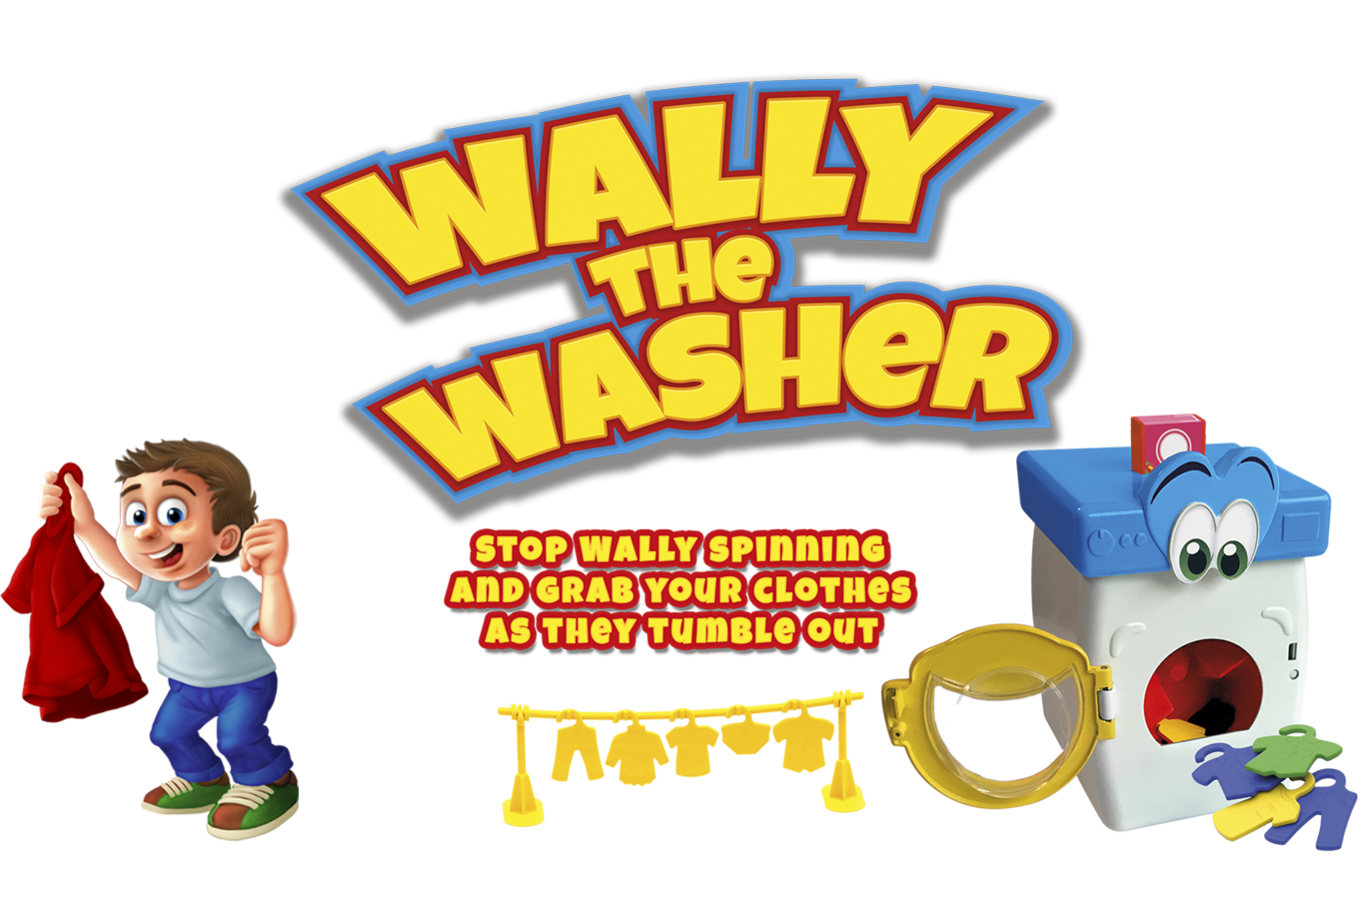 Wally the Washer